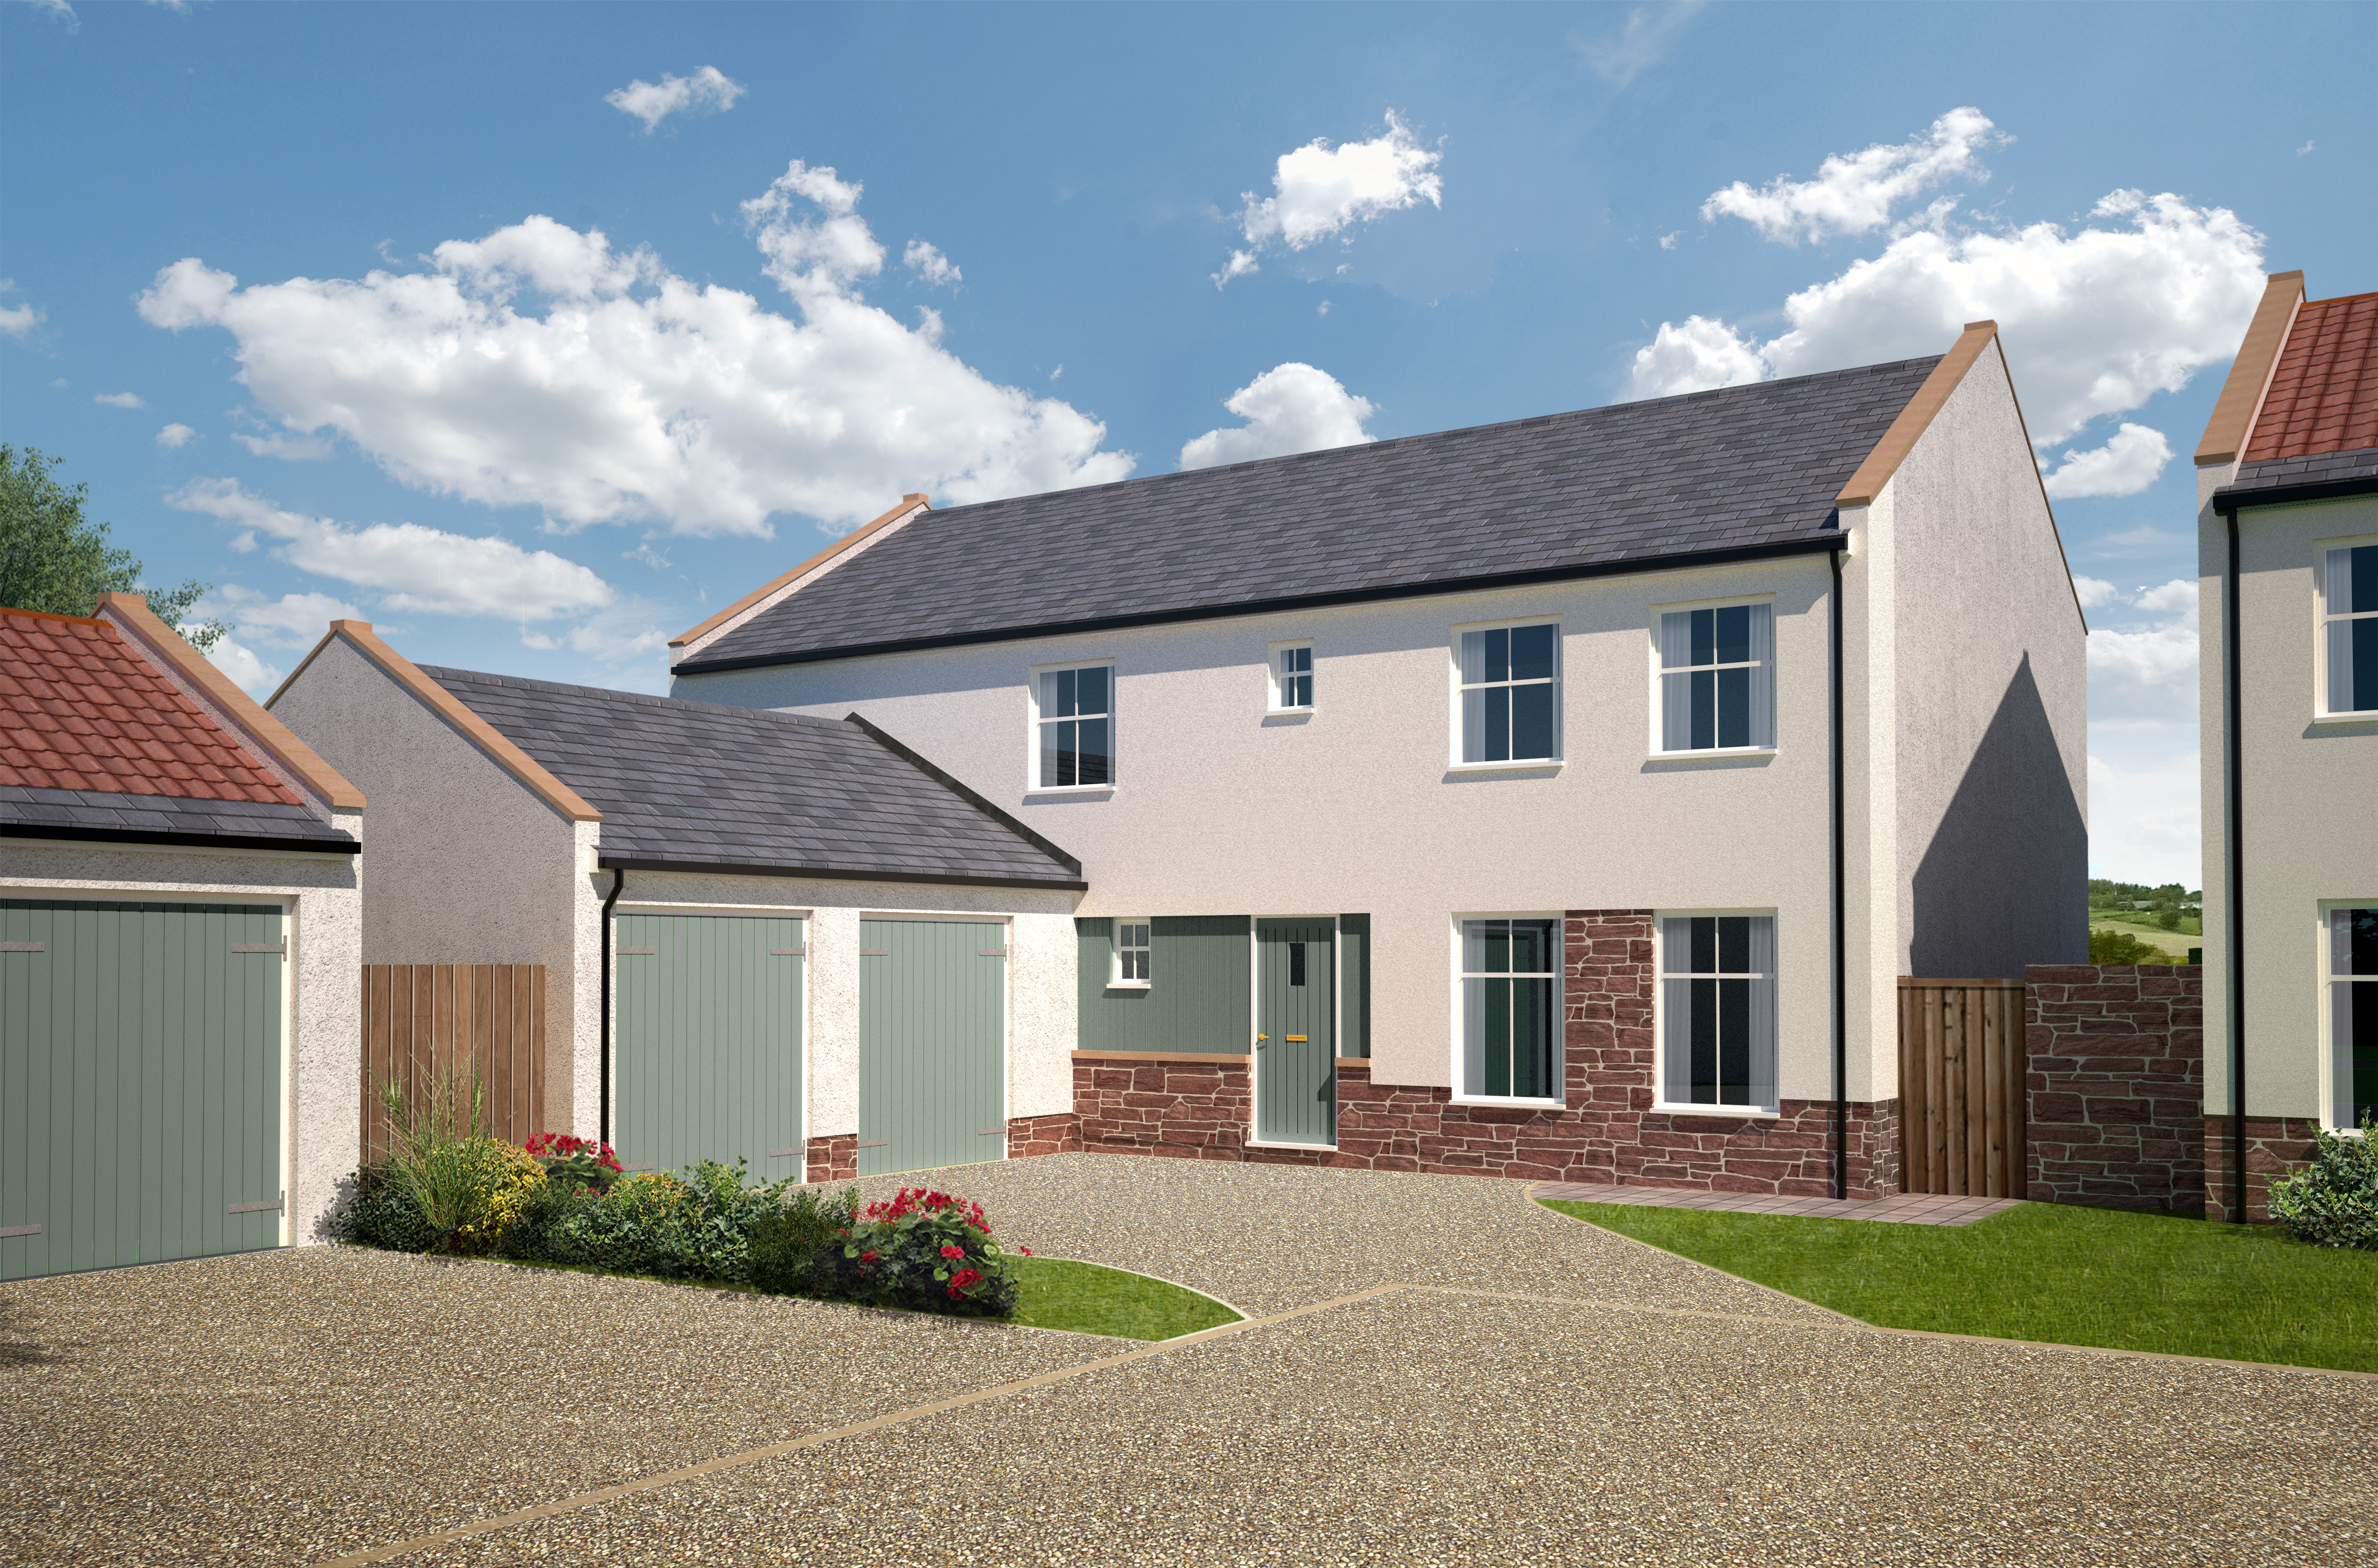 PLOTS 2 AND 4 ARE NOW SOLD